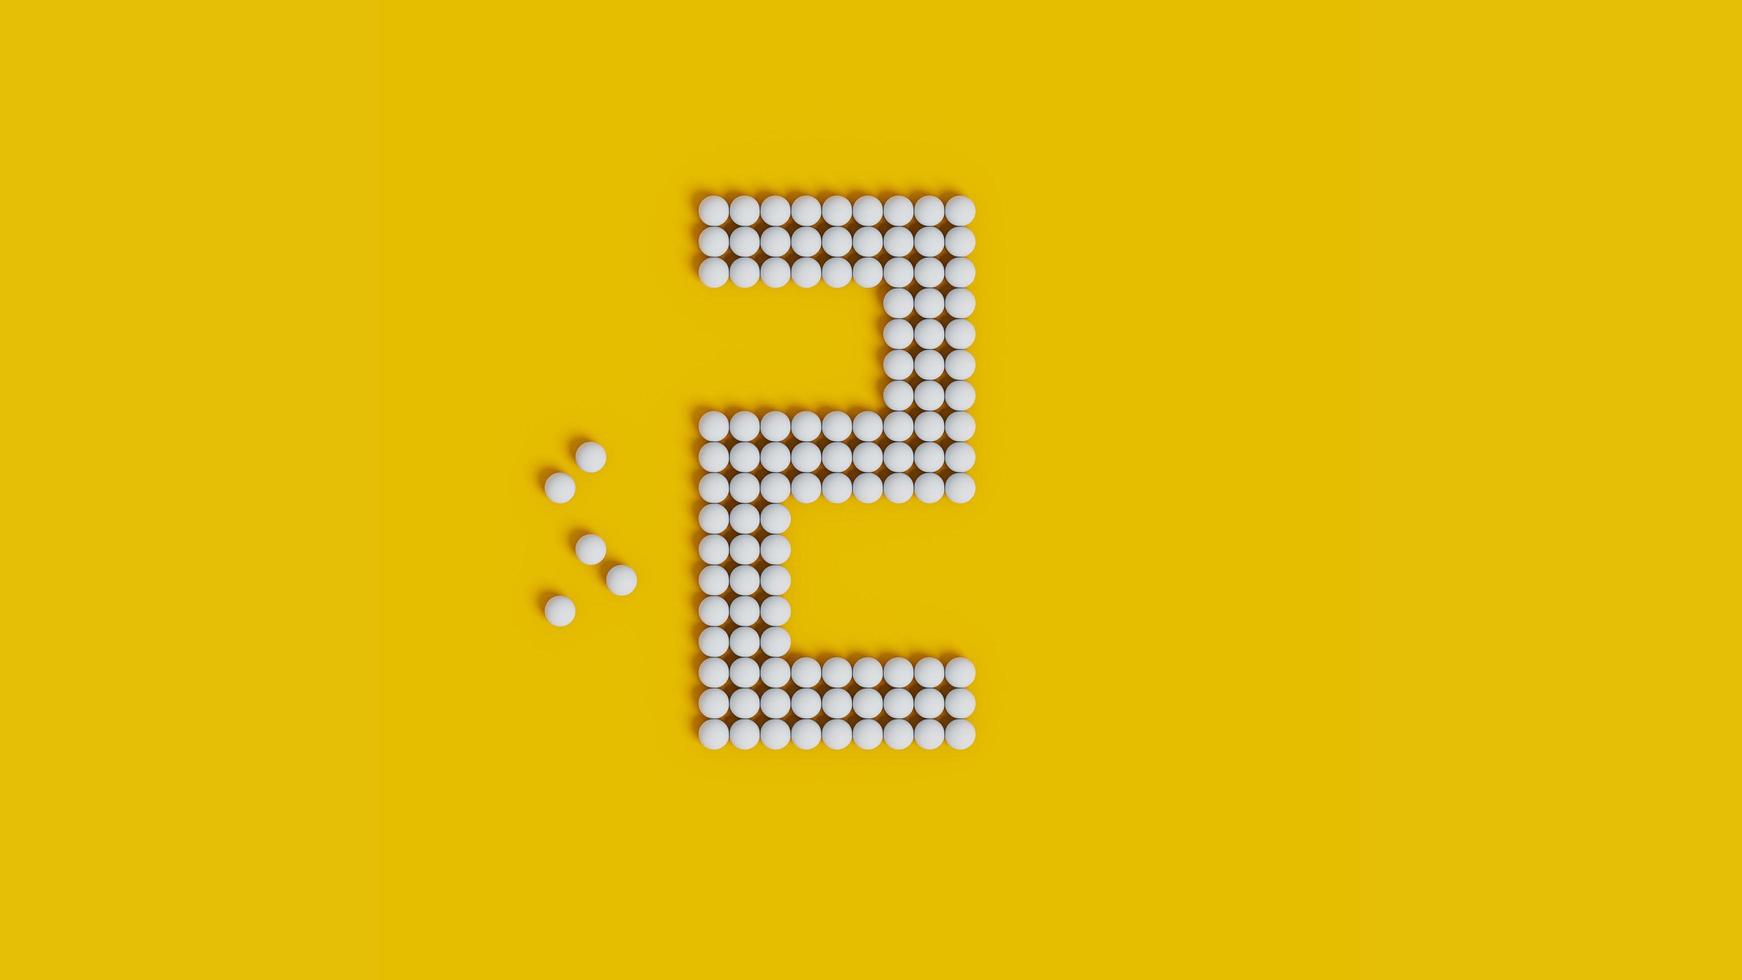 3D Rendering of numbering text using 3D sphere style. With white and yellow color scheme. 3D voxel art of one number with sphere style photo